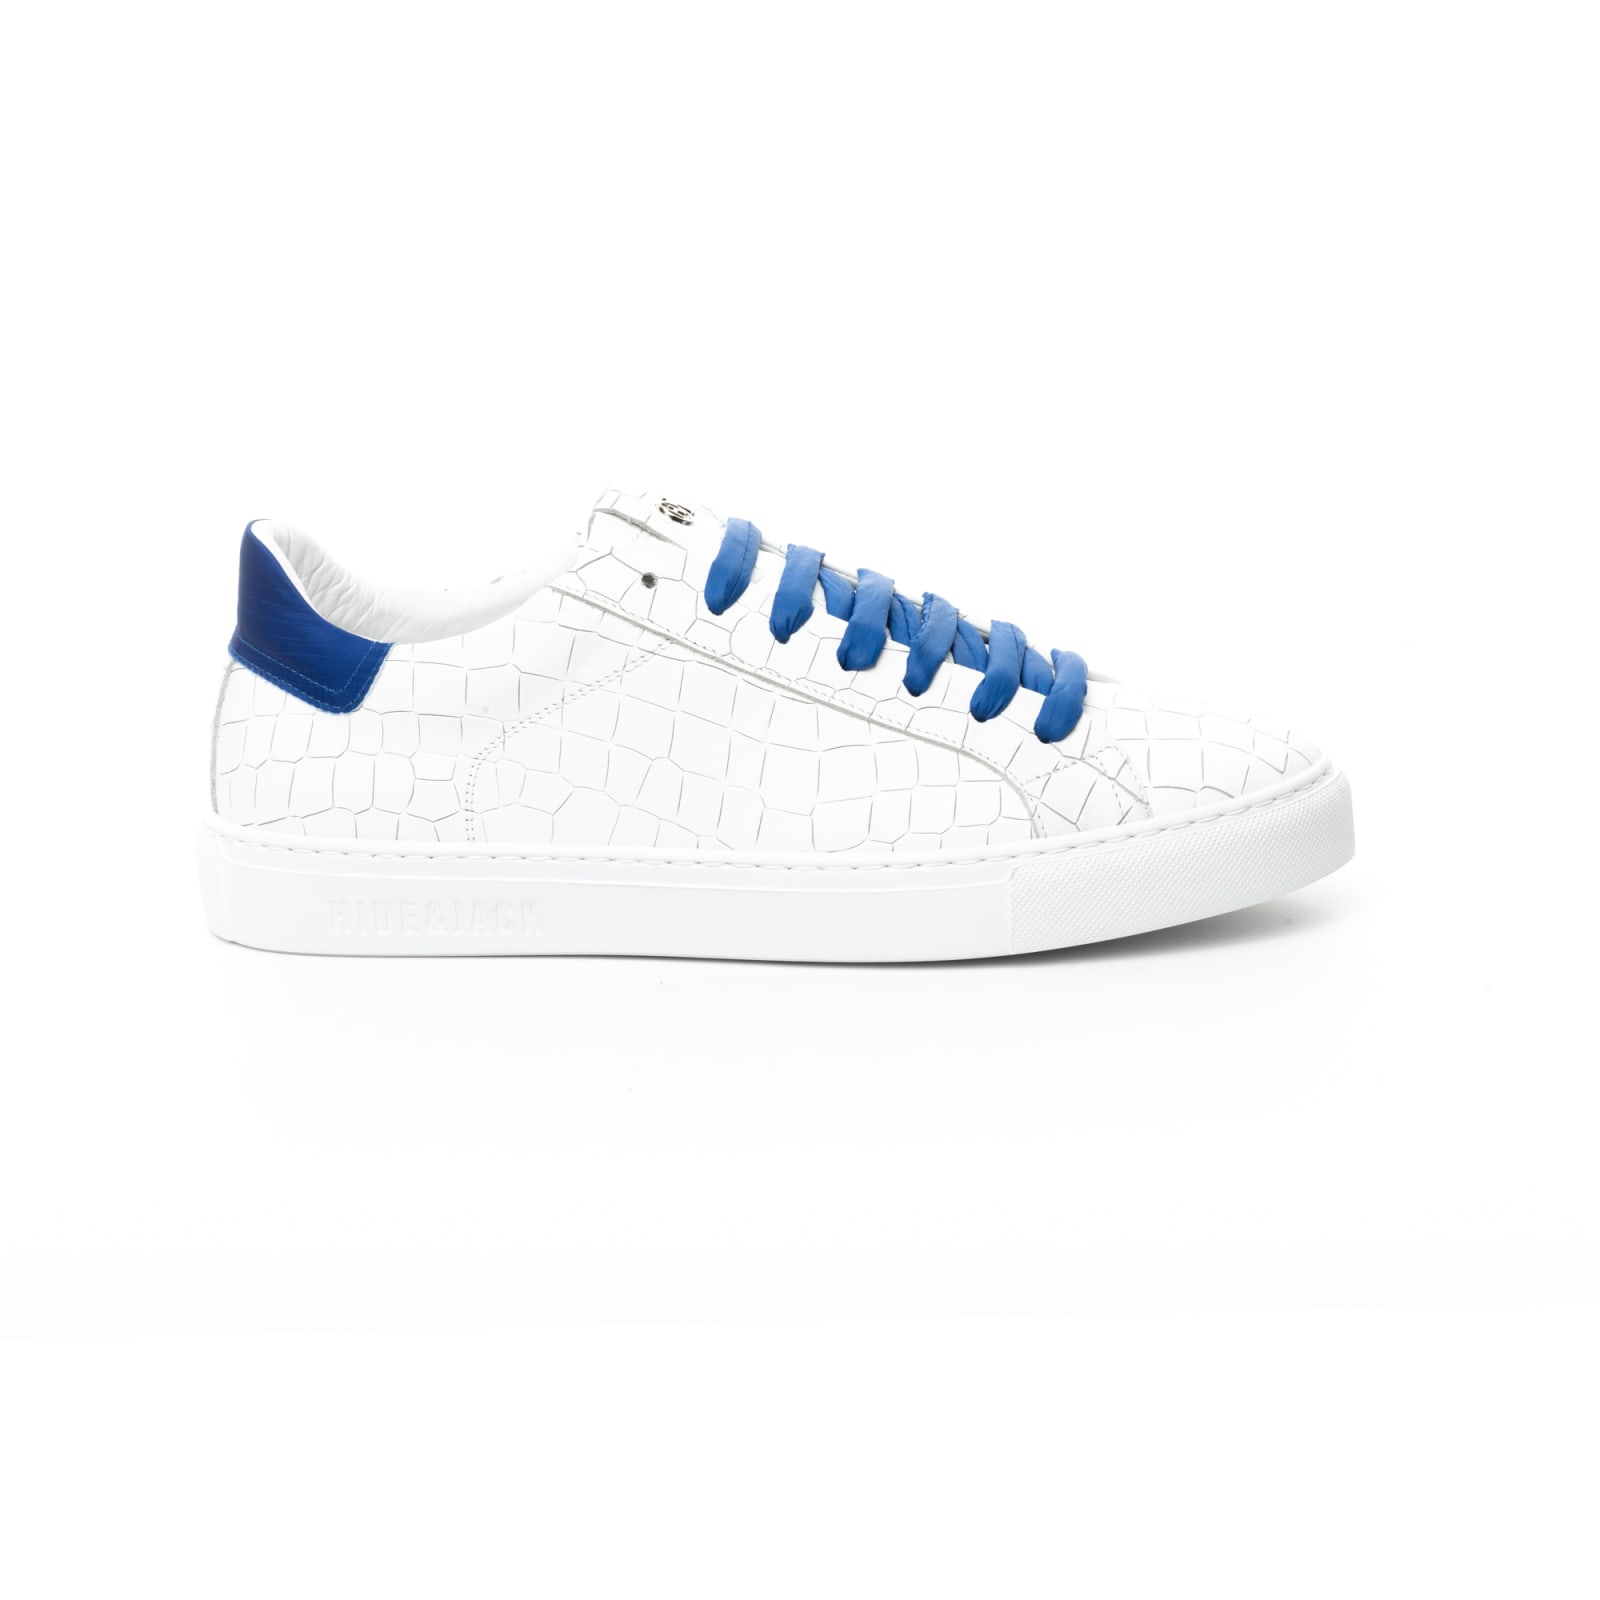 Hide & Jack Low Top Sneaker - Tuscany Blue White